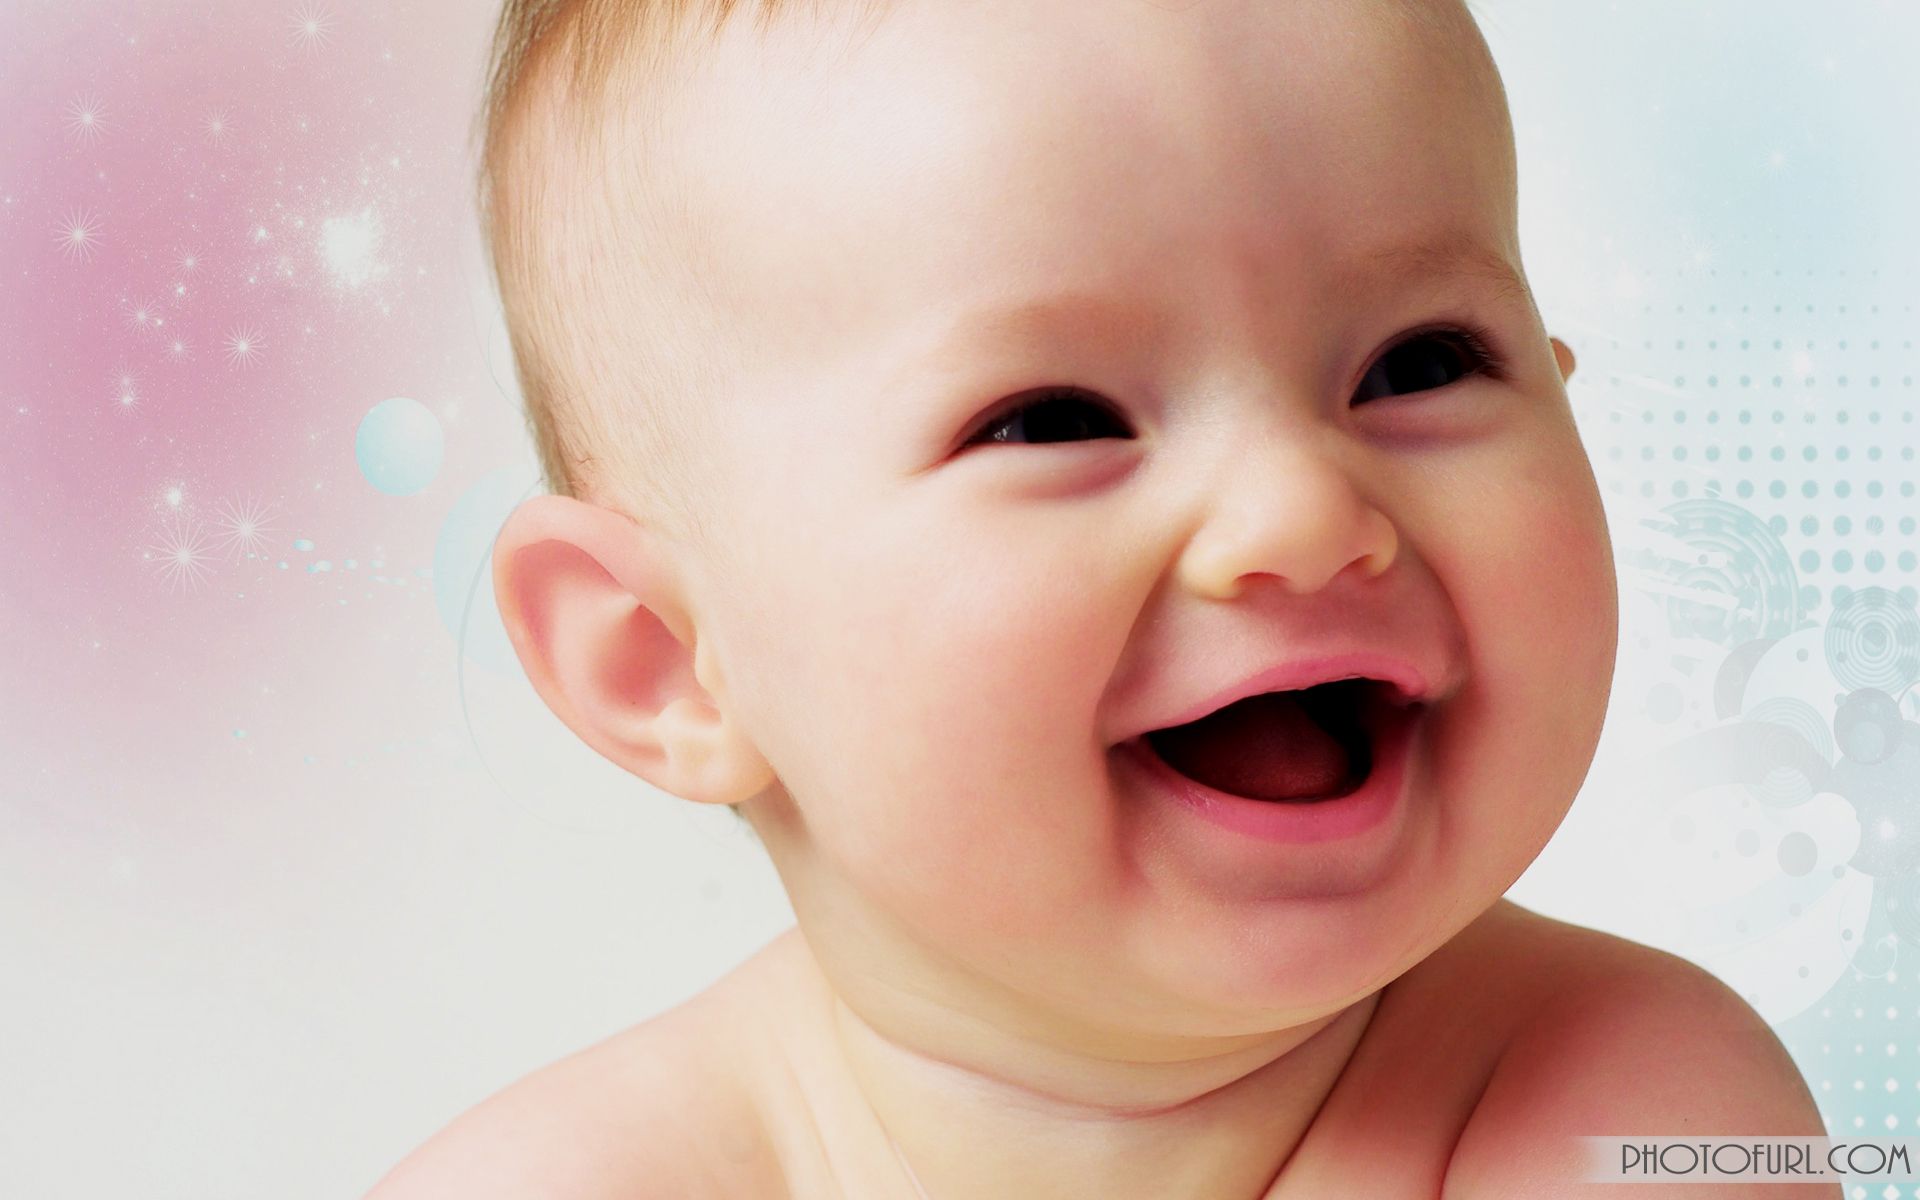 Smiling Baby Image HD Wallpaper & Background Download